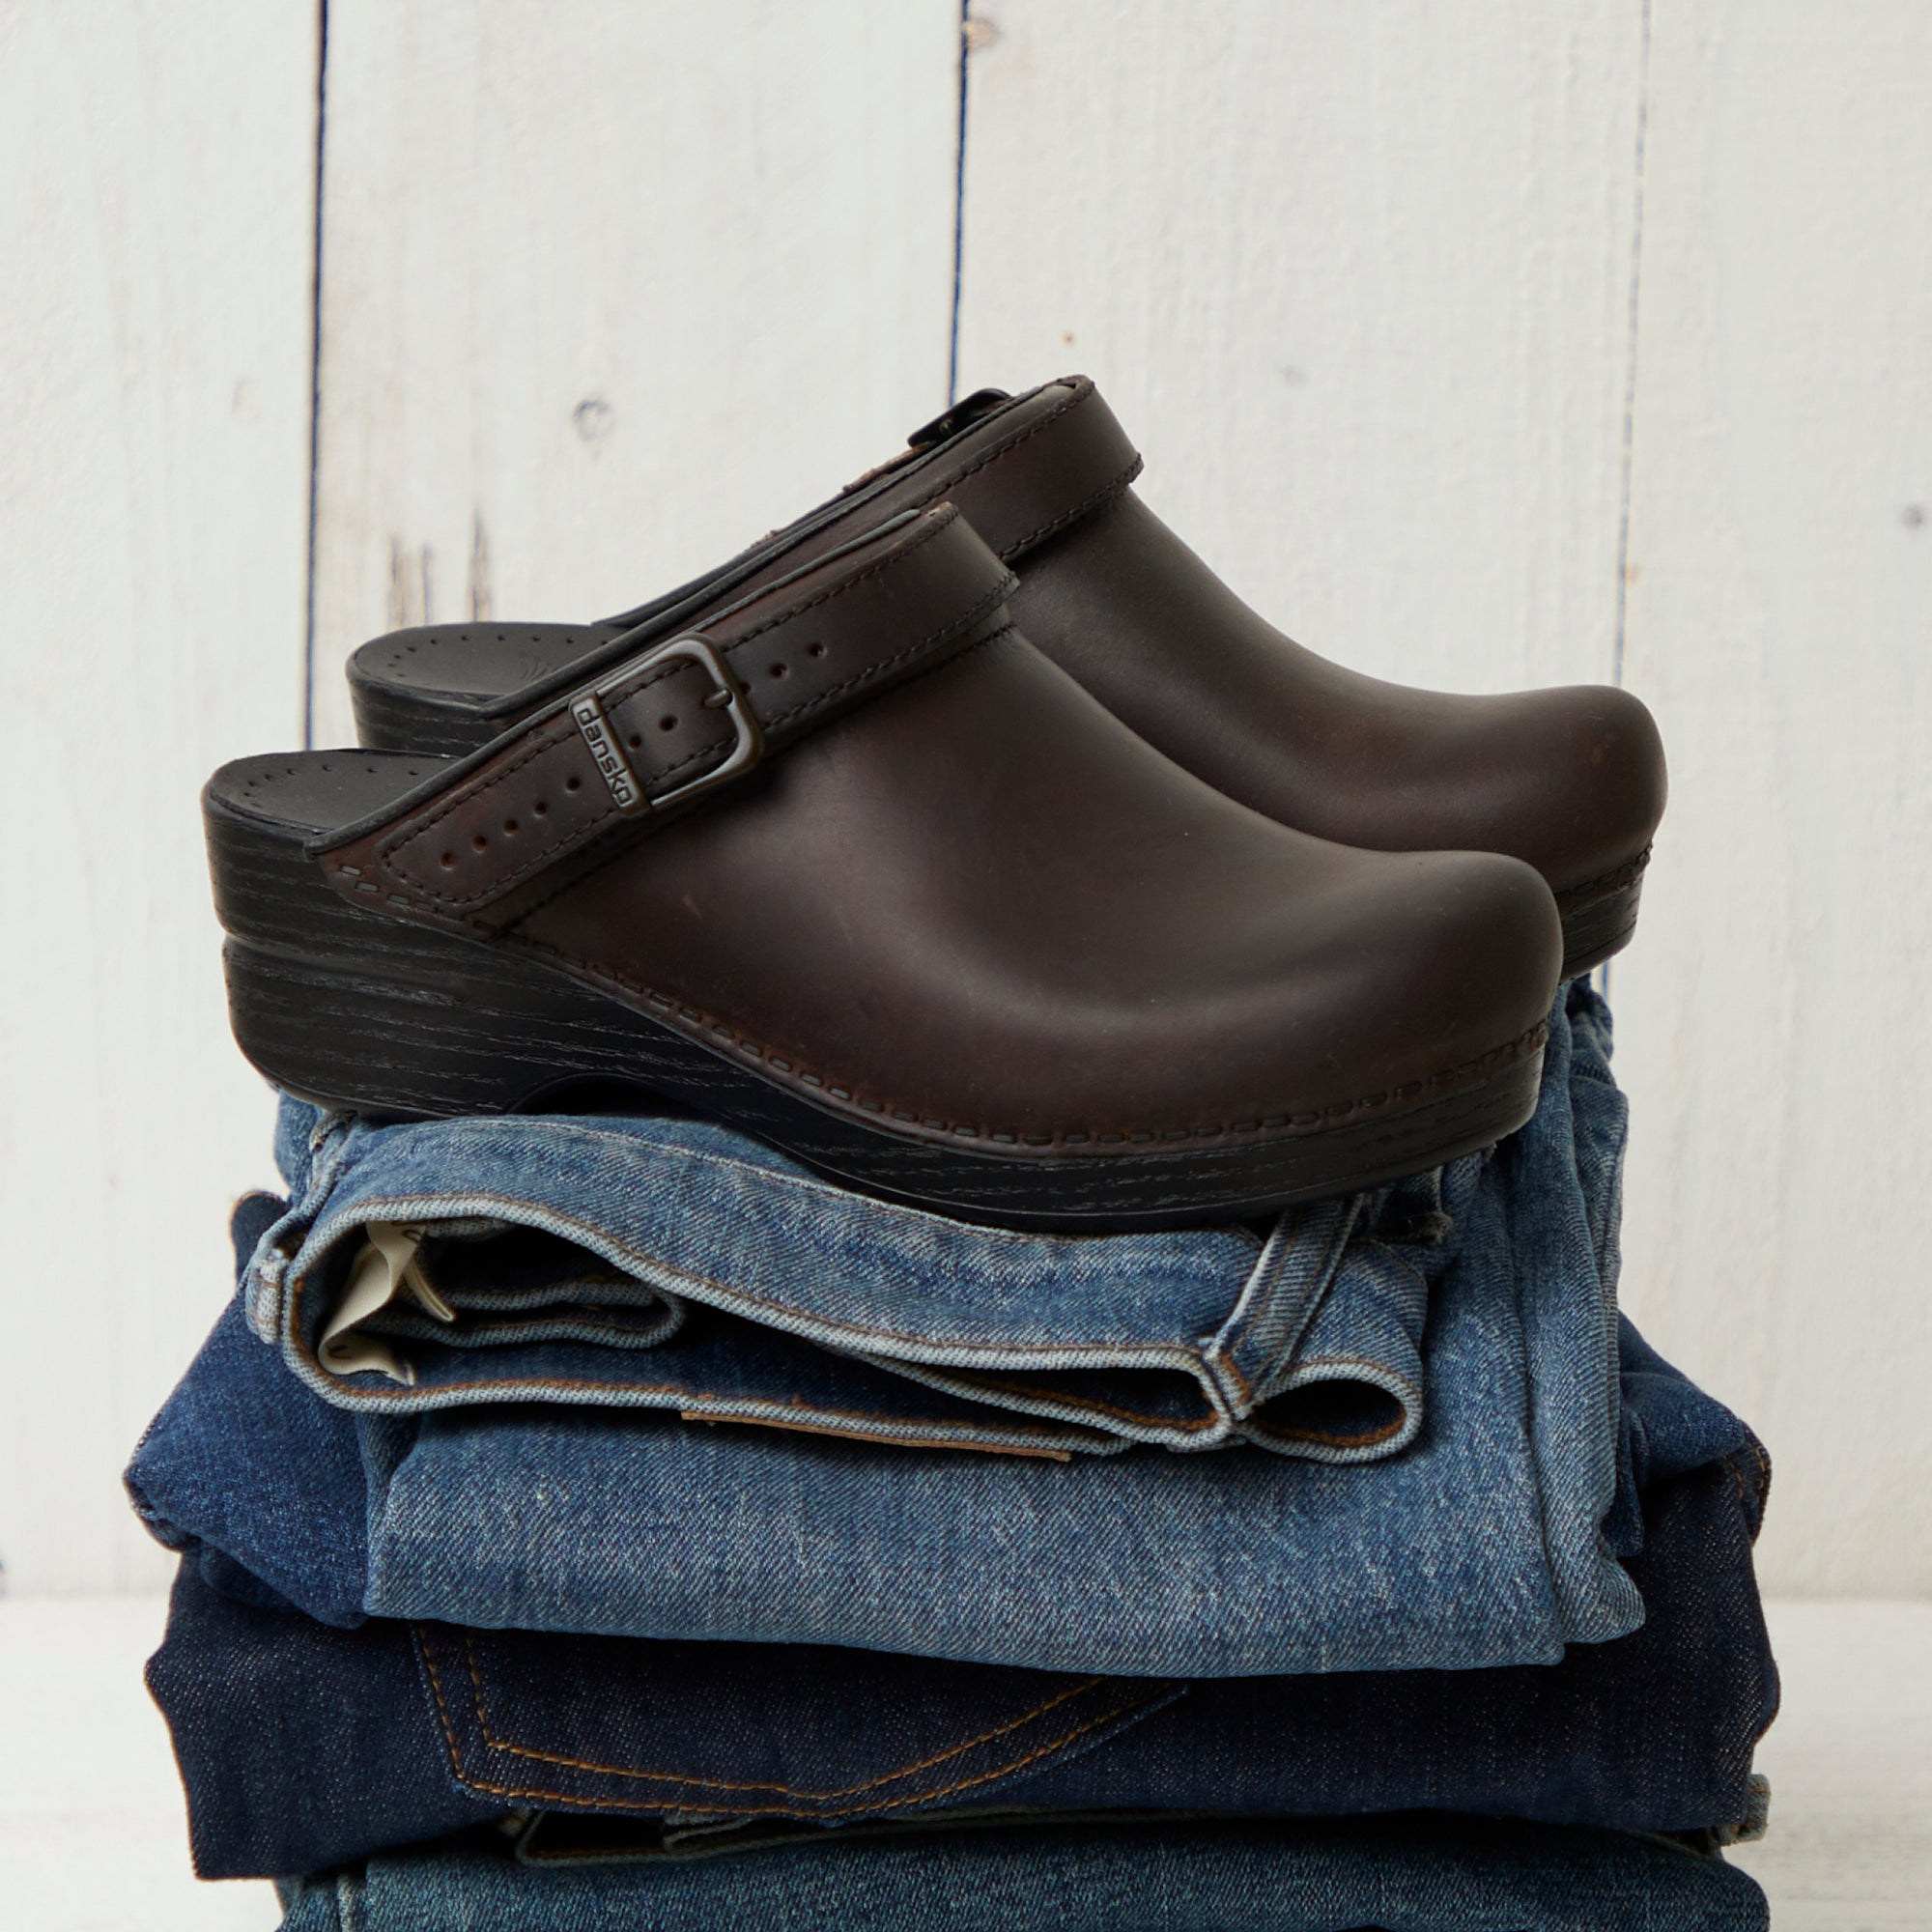 Brown backless clogs with an adjustable strap stacked on top of pairs of jeans.